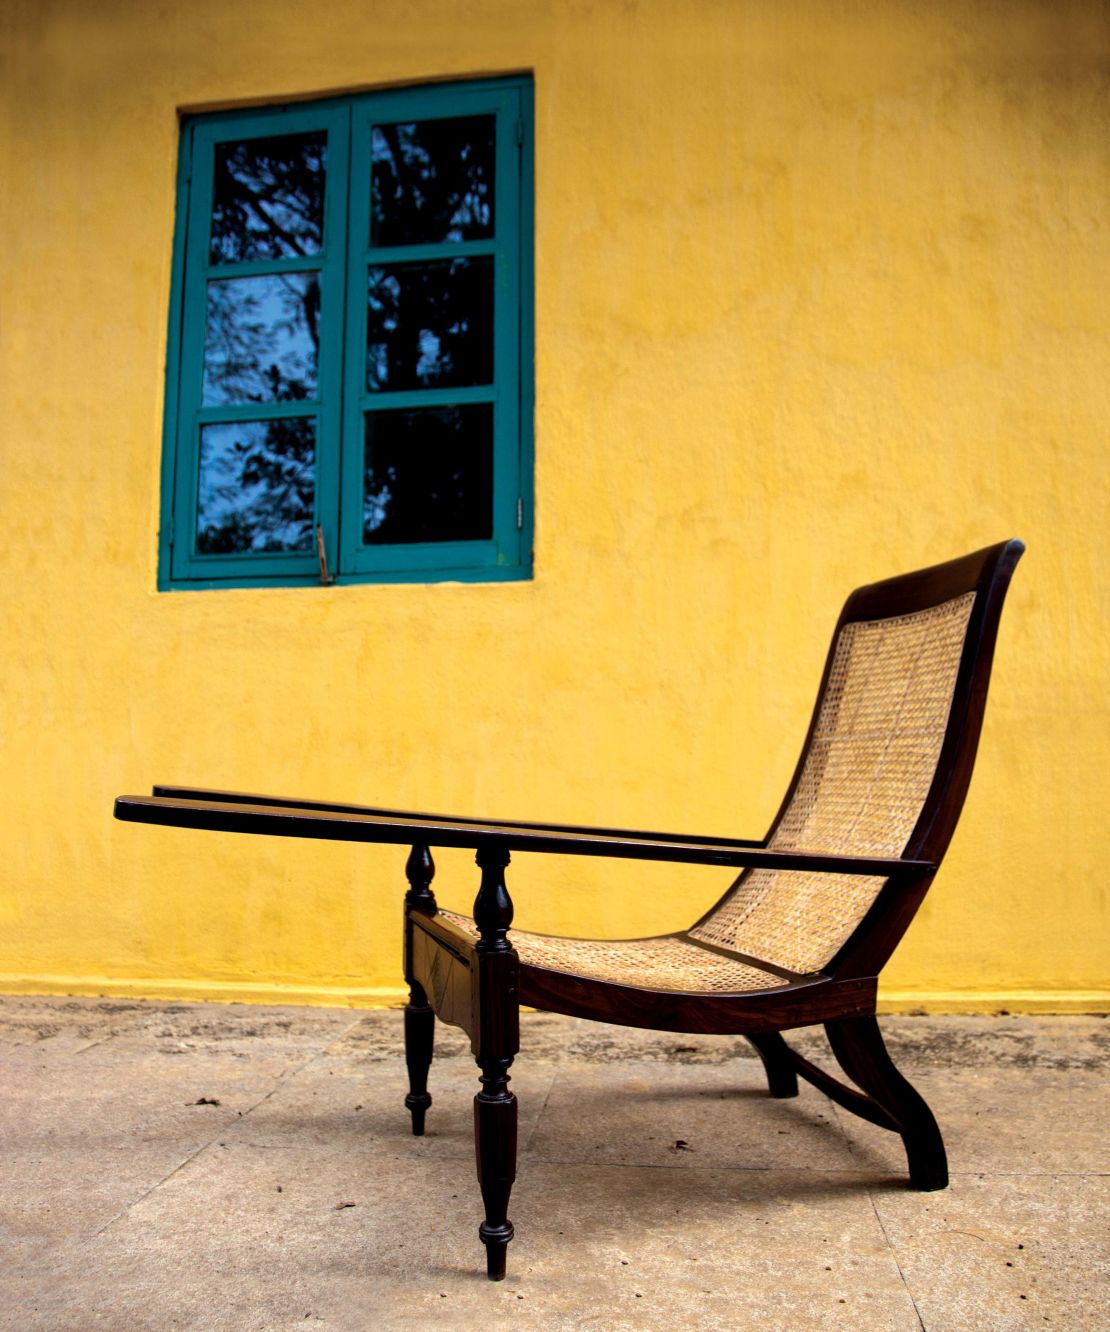 The planter's chair is thought to have been imported to India from Sri Lanka by the British. It has become a staple of the county, with its cane weaving much more suitable to the climate than a sofa.